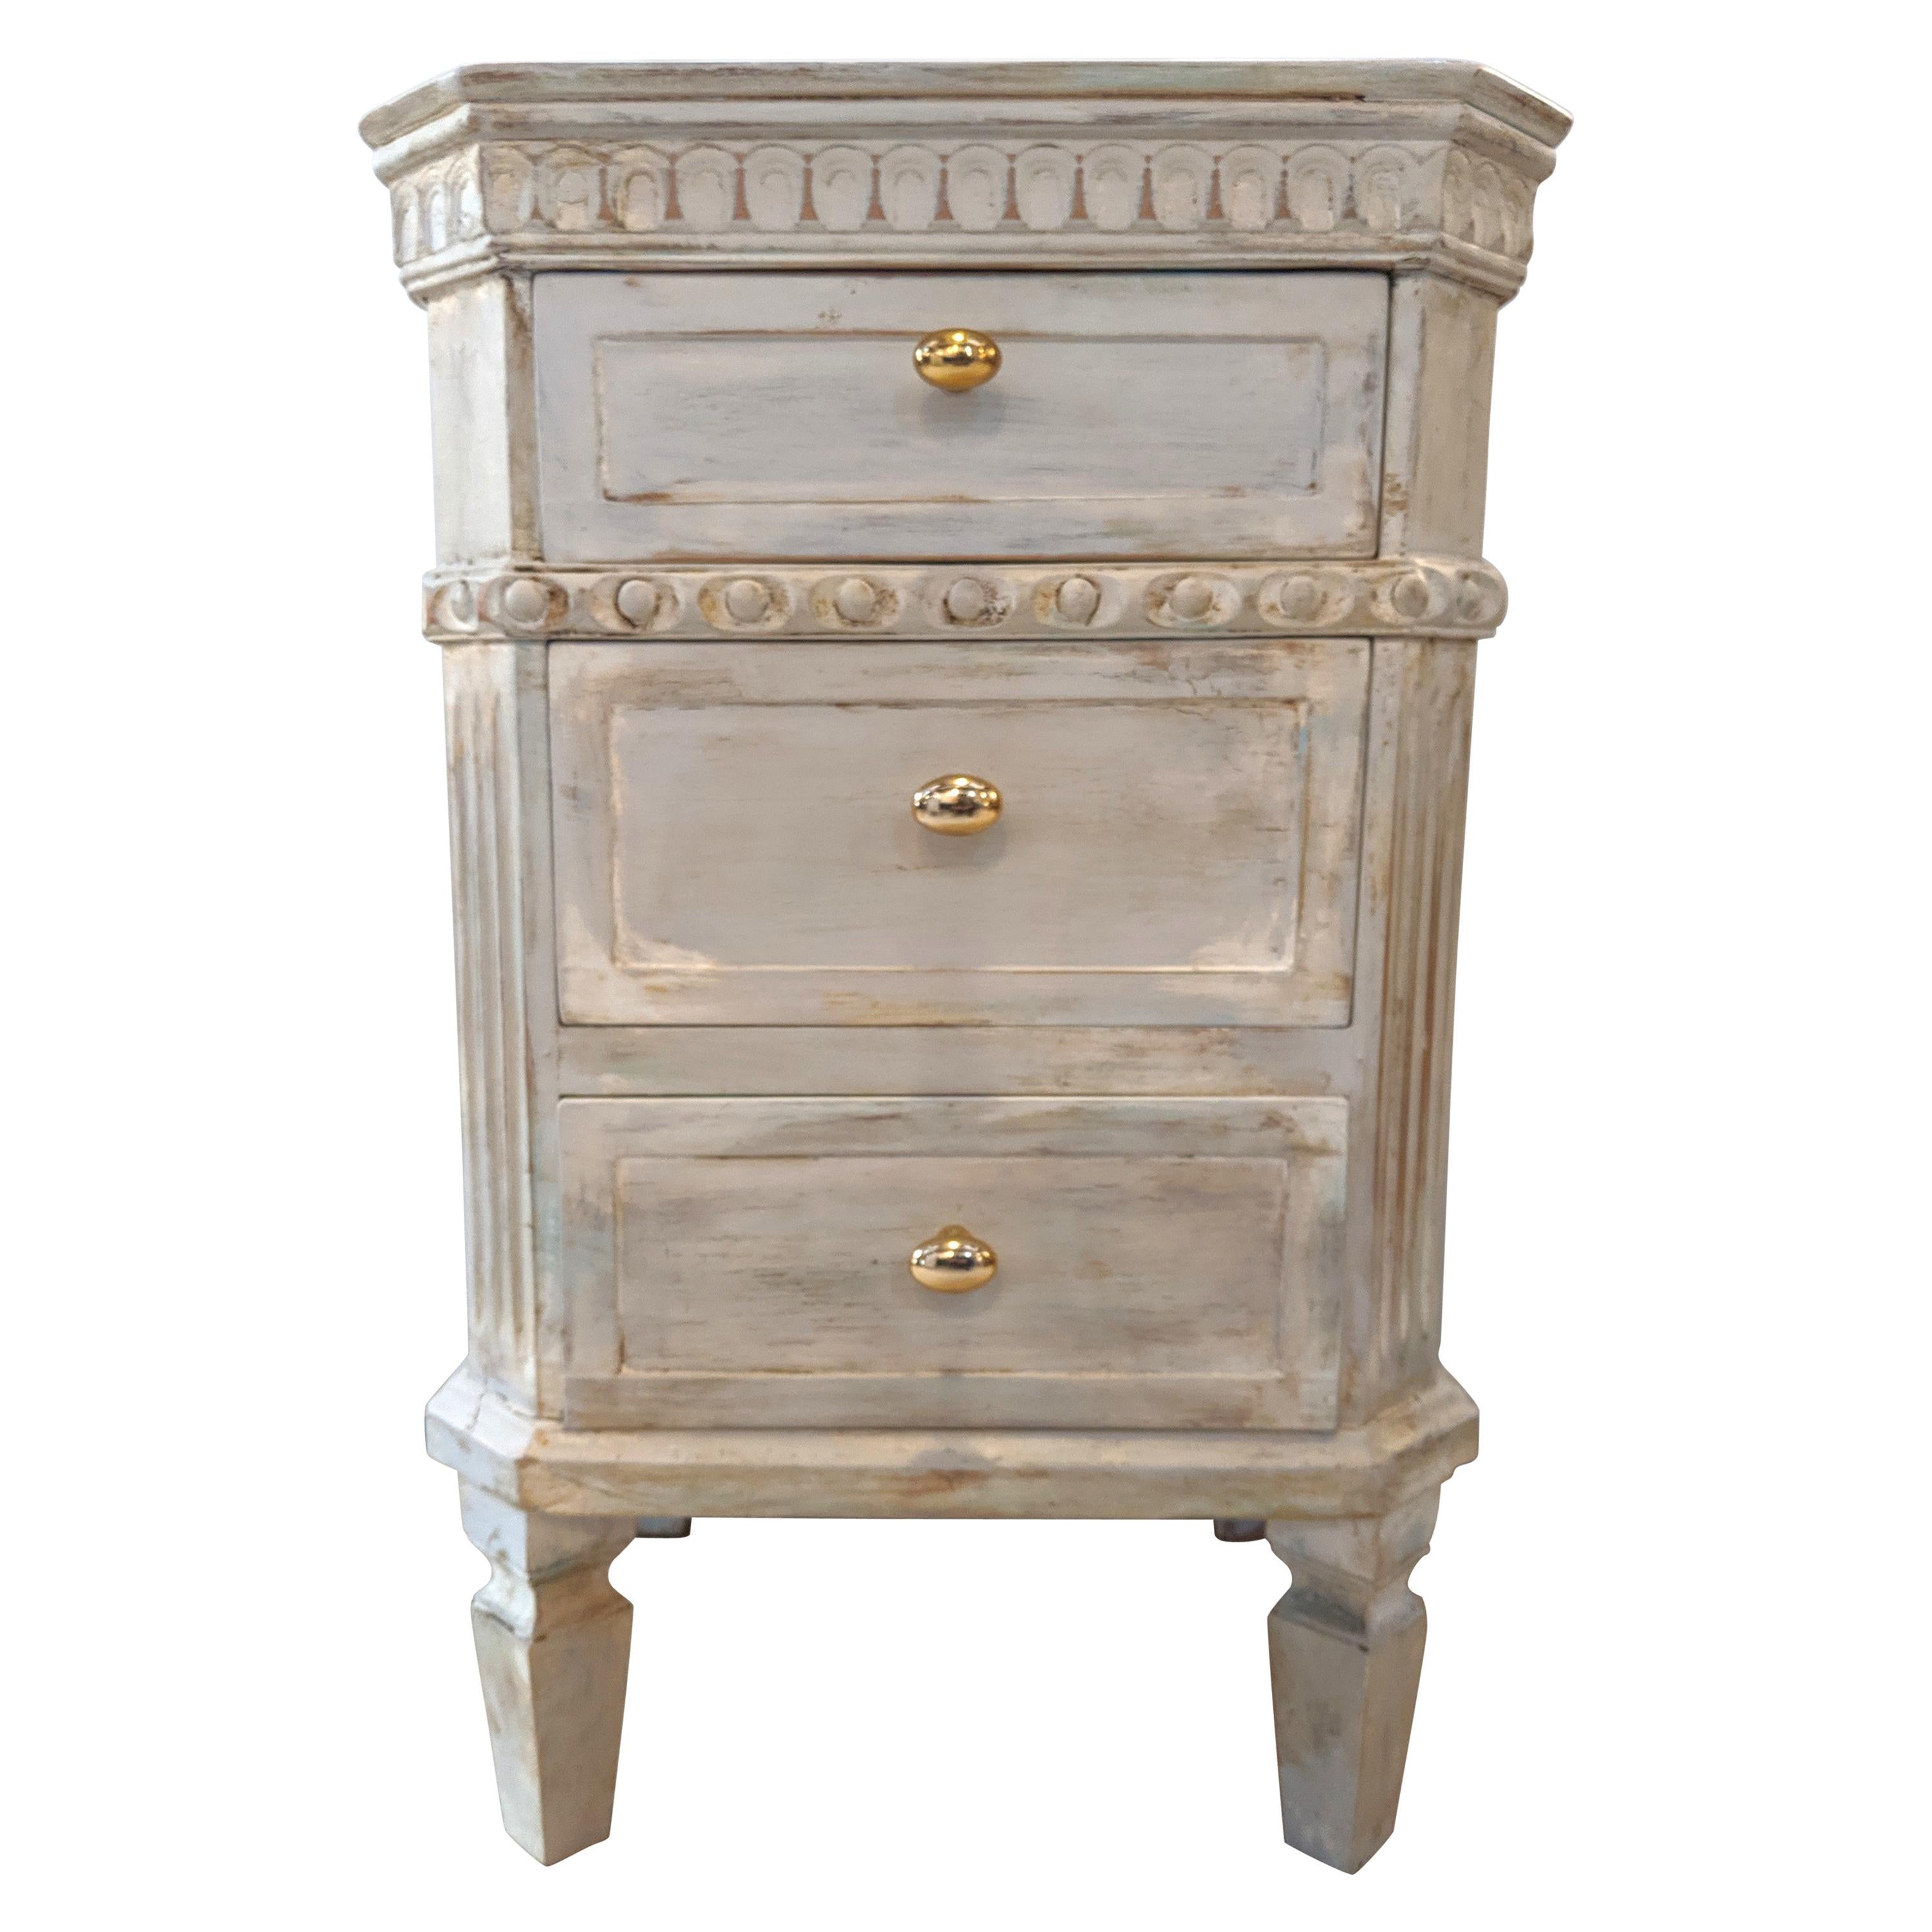 Pair of Swedish paint decorated end tables or nightstands. Each made from painted distressed wood with three drawers under carved apron tops and sitting on tapering legs. The drawers with brass pulls.